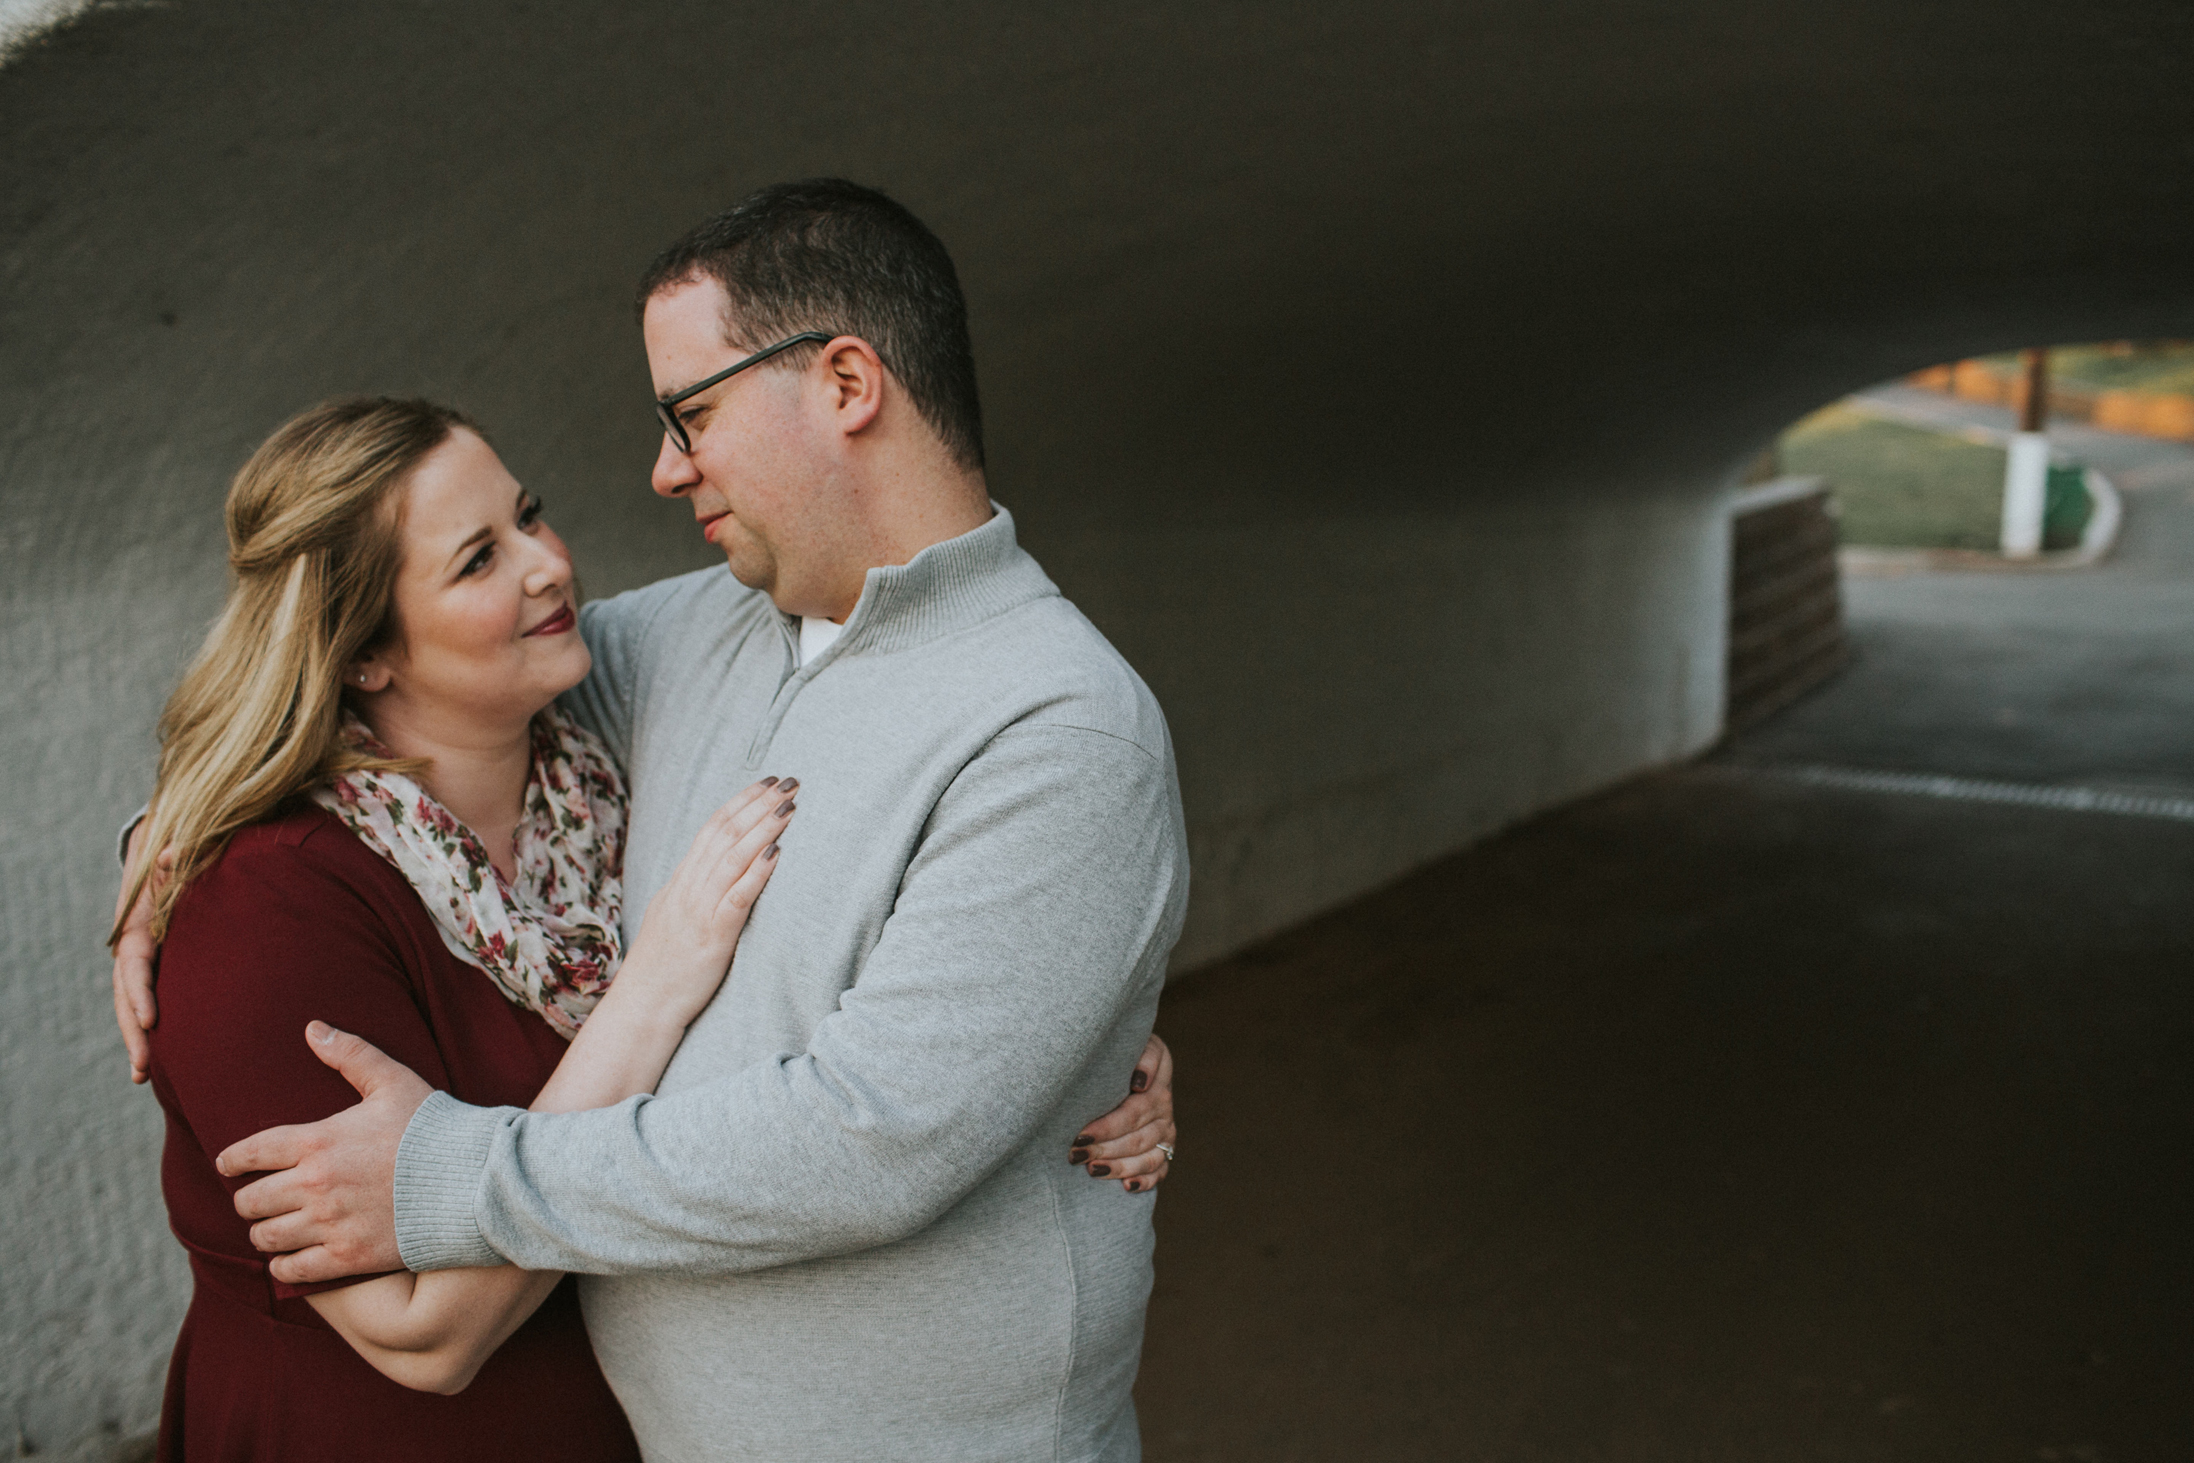 253-at-home-engagement-session-nj